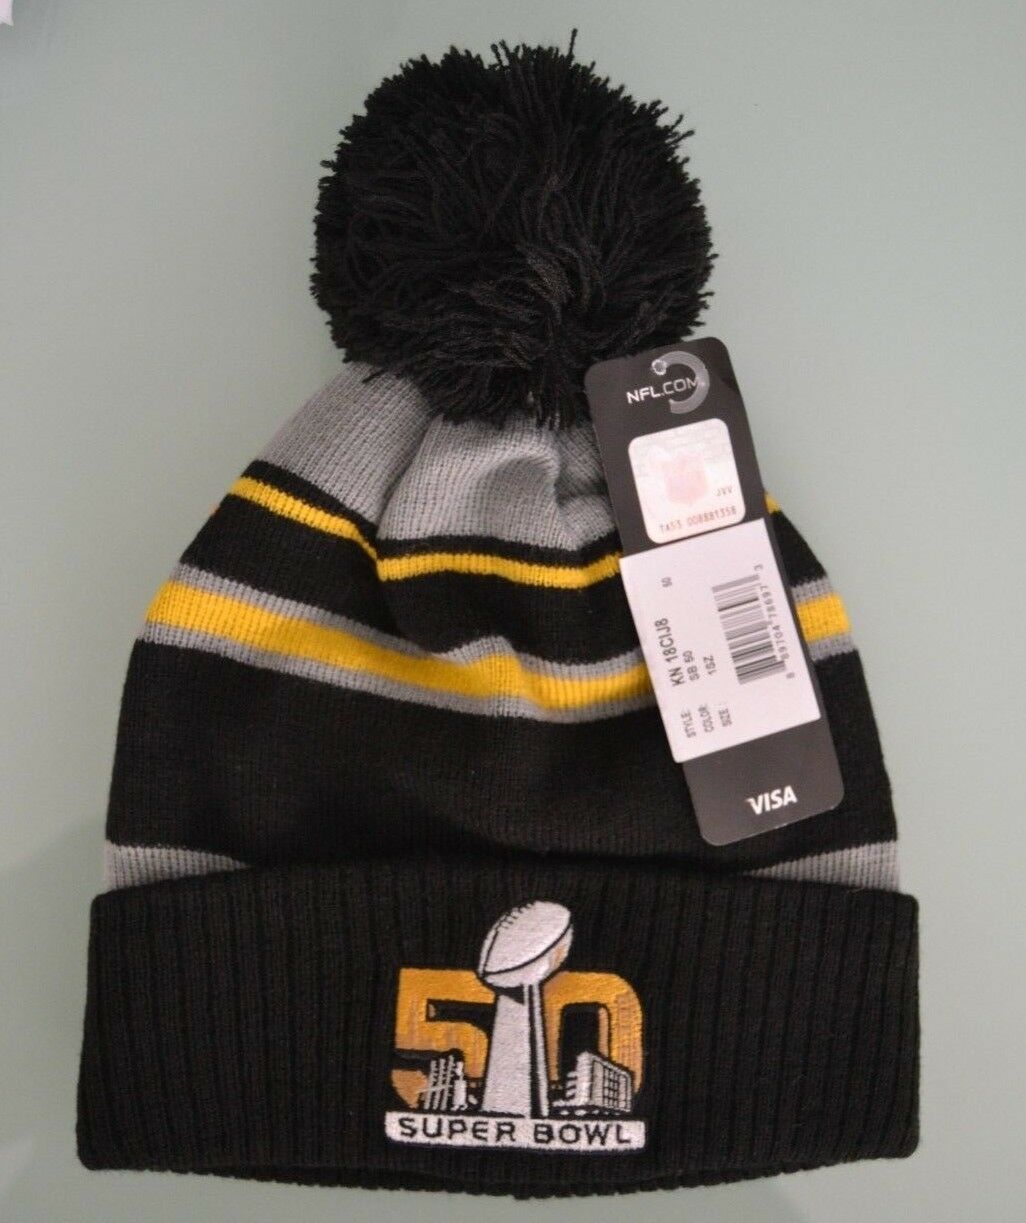 Primary image for NFL Super Bowl 50 Youth Black/Gray Cuffed Knit Hat NWT